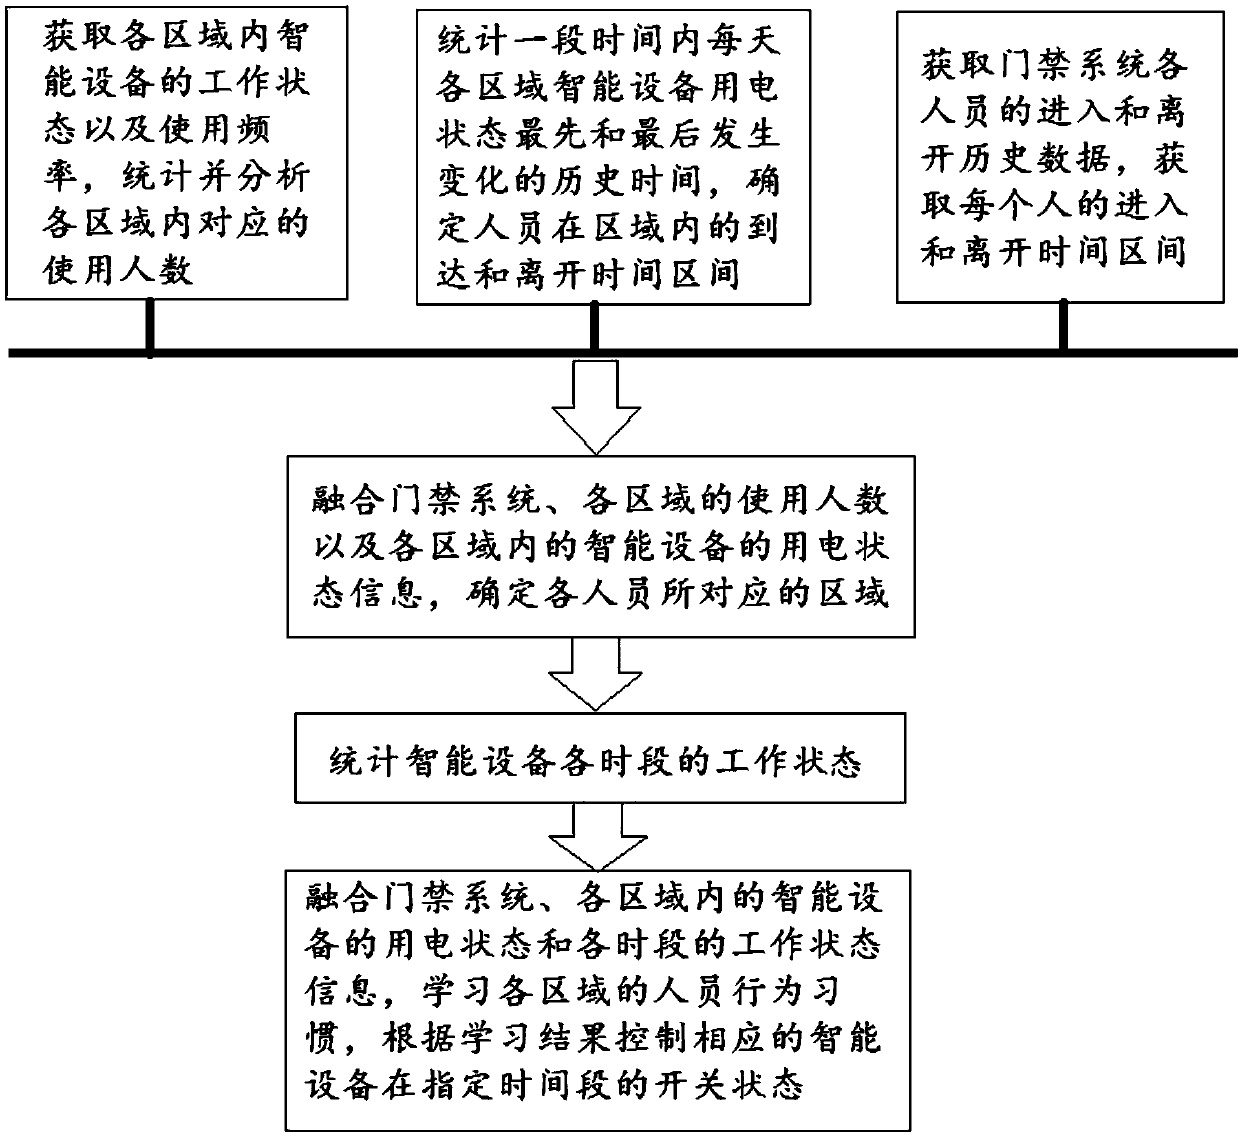 Human, machine and object information fused intelligent building management method, system and application